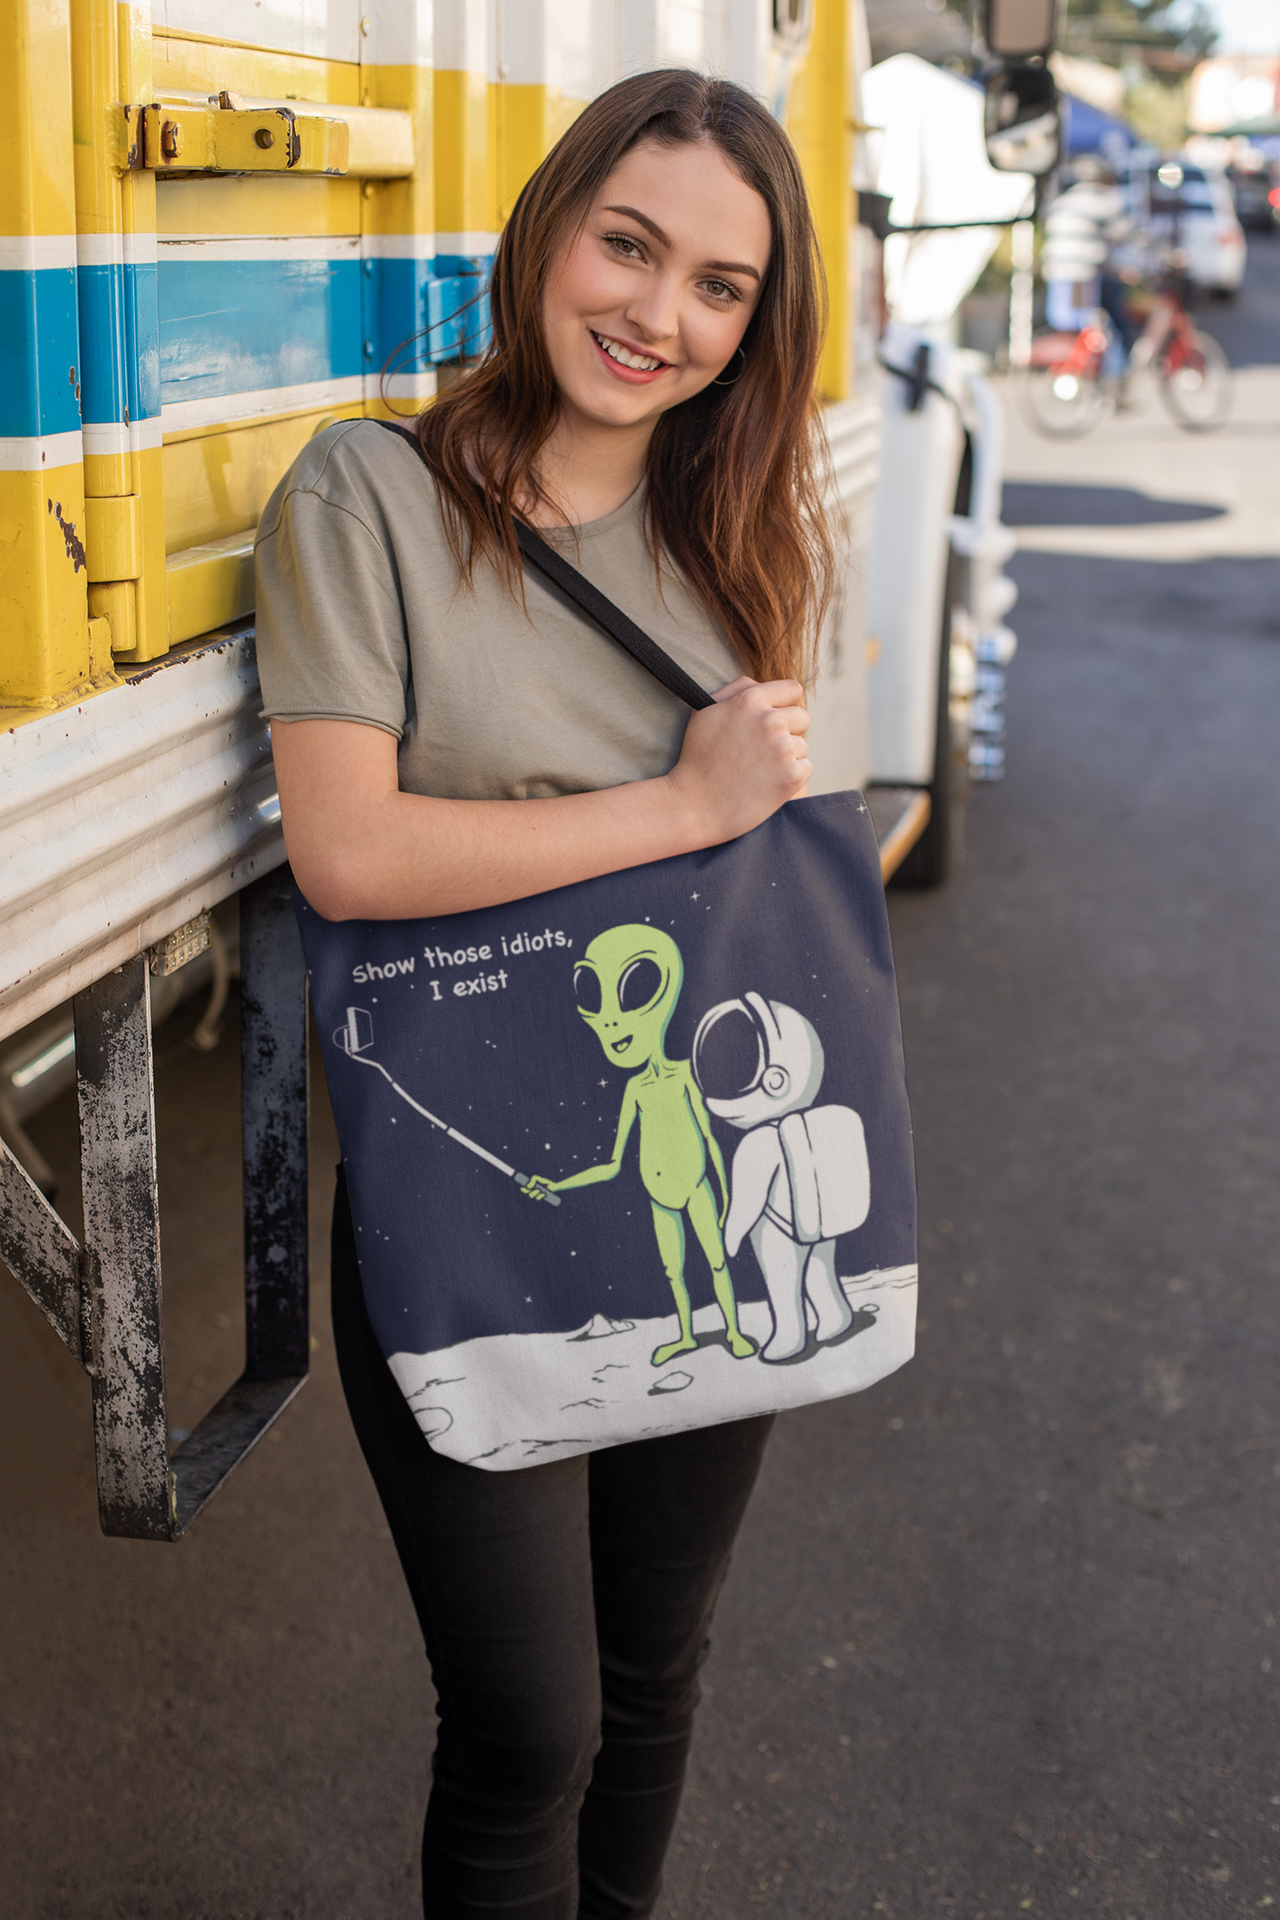 Funny Alien, Show Those Idiots I Exist Tote BagFunny Alien Show Those Idiots I Exist Everyday practical high quality Tote Bag.  Comfortable with style ideal for the beach or out in town. Made from reliable materiHandbagsEXPRESS WOMEN'S FASHIONYellow PandoraFunny Alien, Show